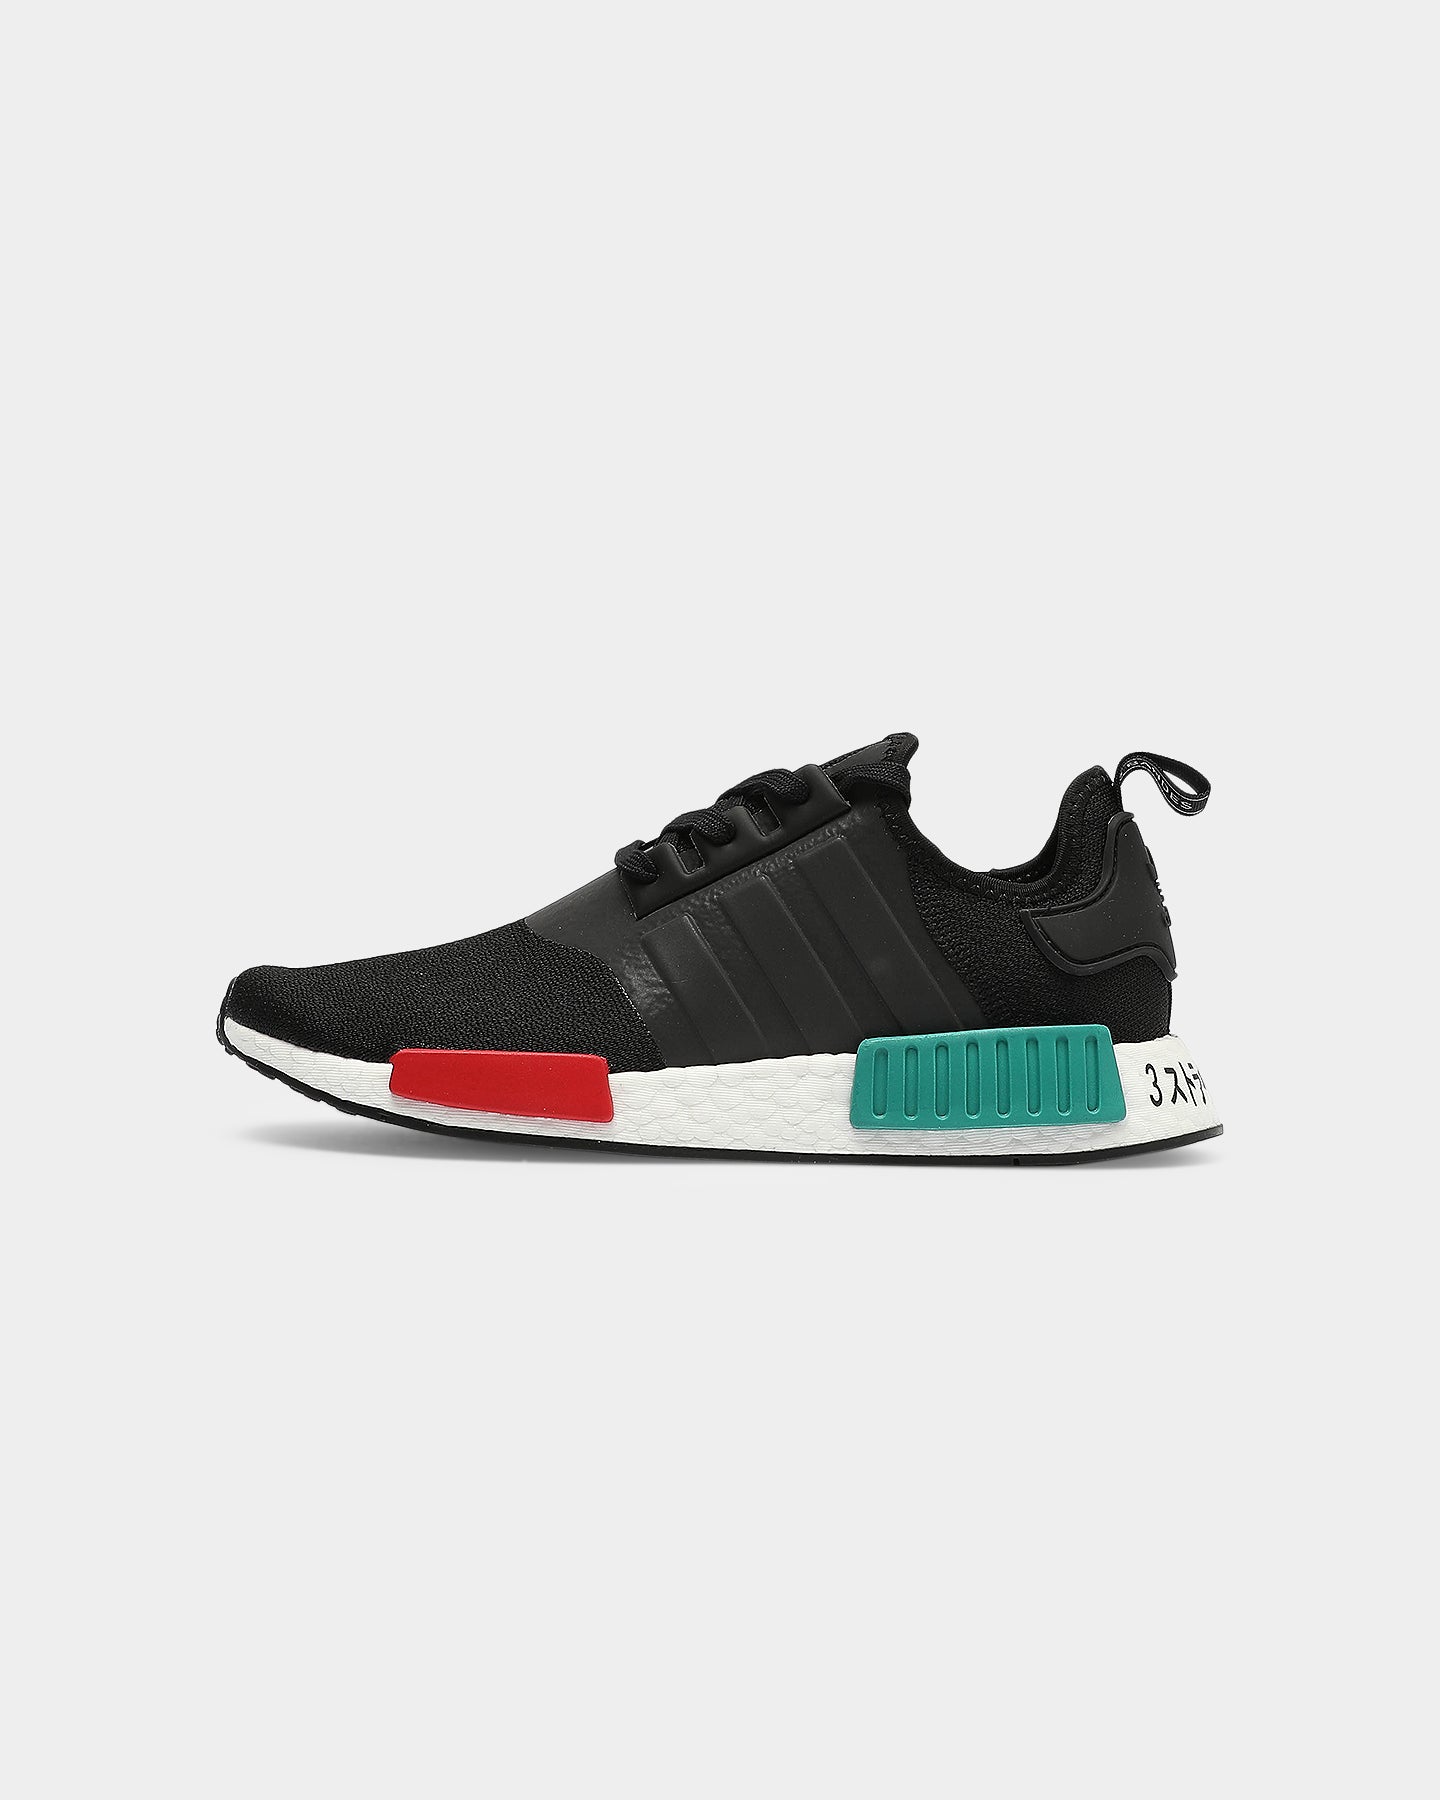 nmd black green red